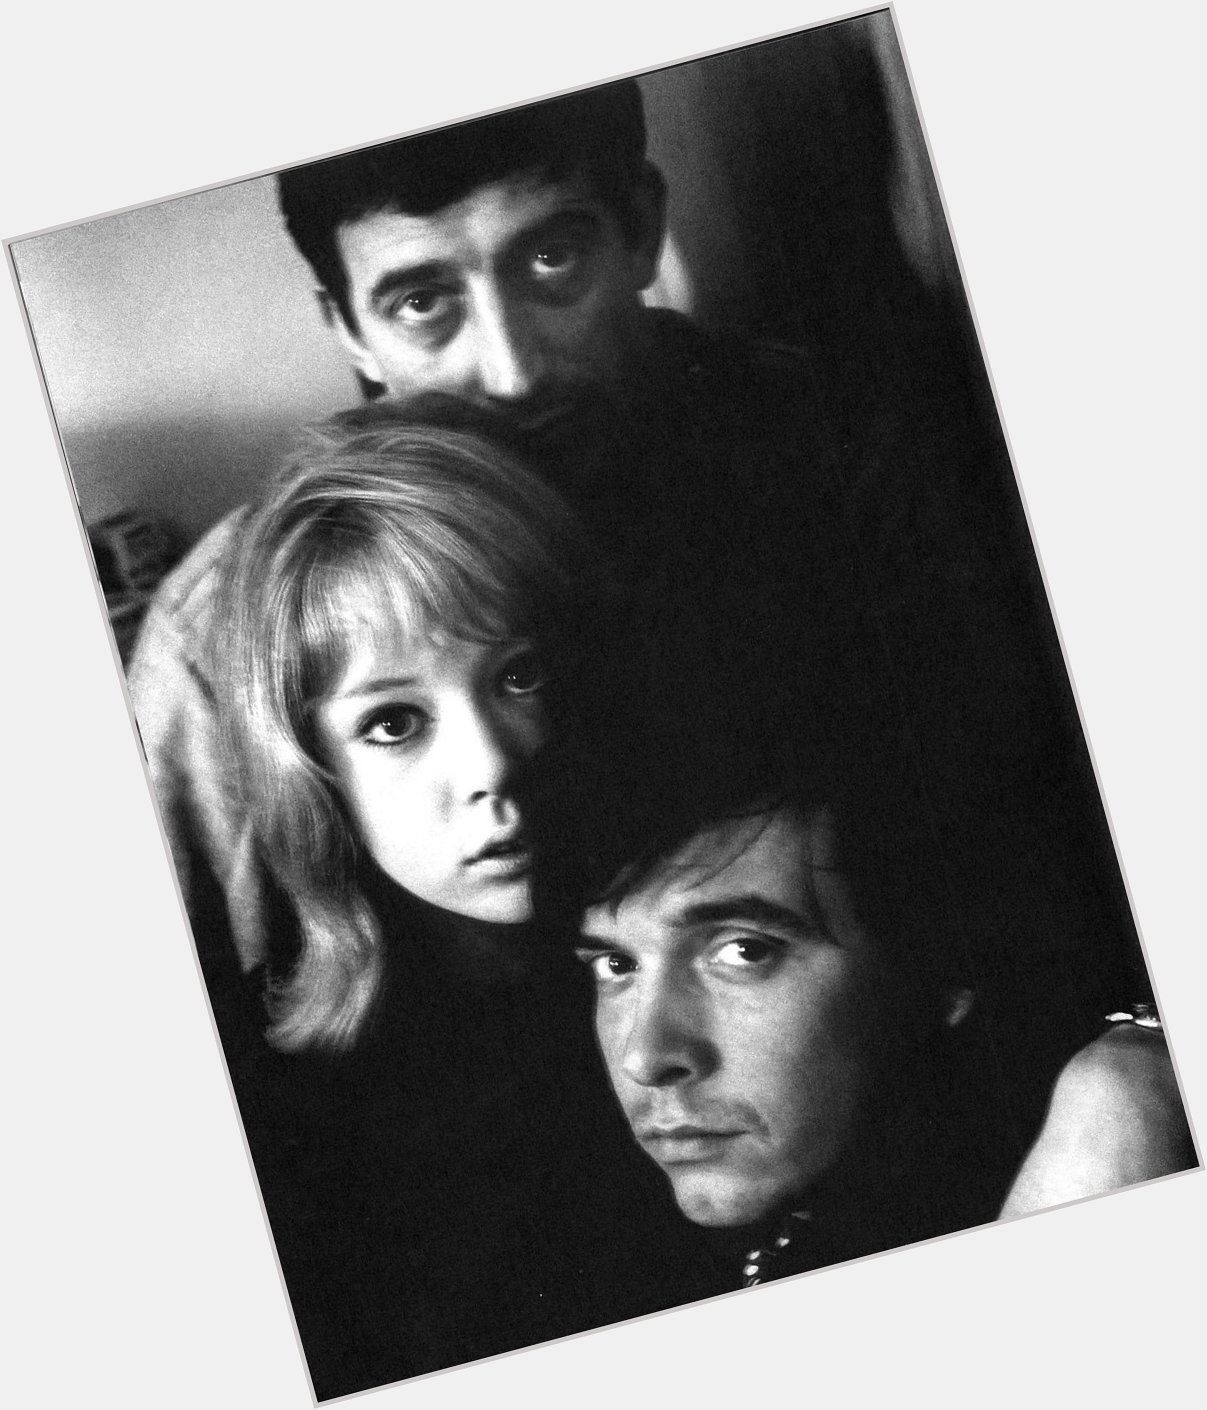 Happy 85th Birthday to the late David Bailey!   With Pattie Boyd and Eric Swayne in 1964 